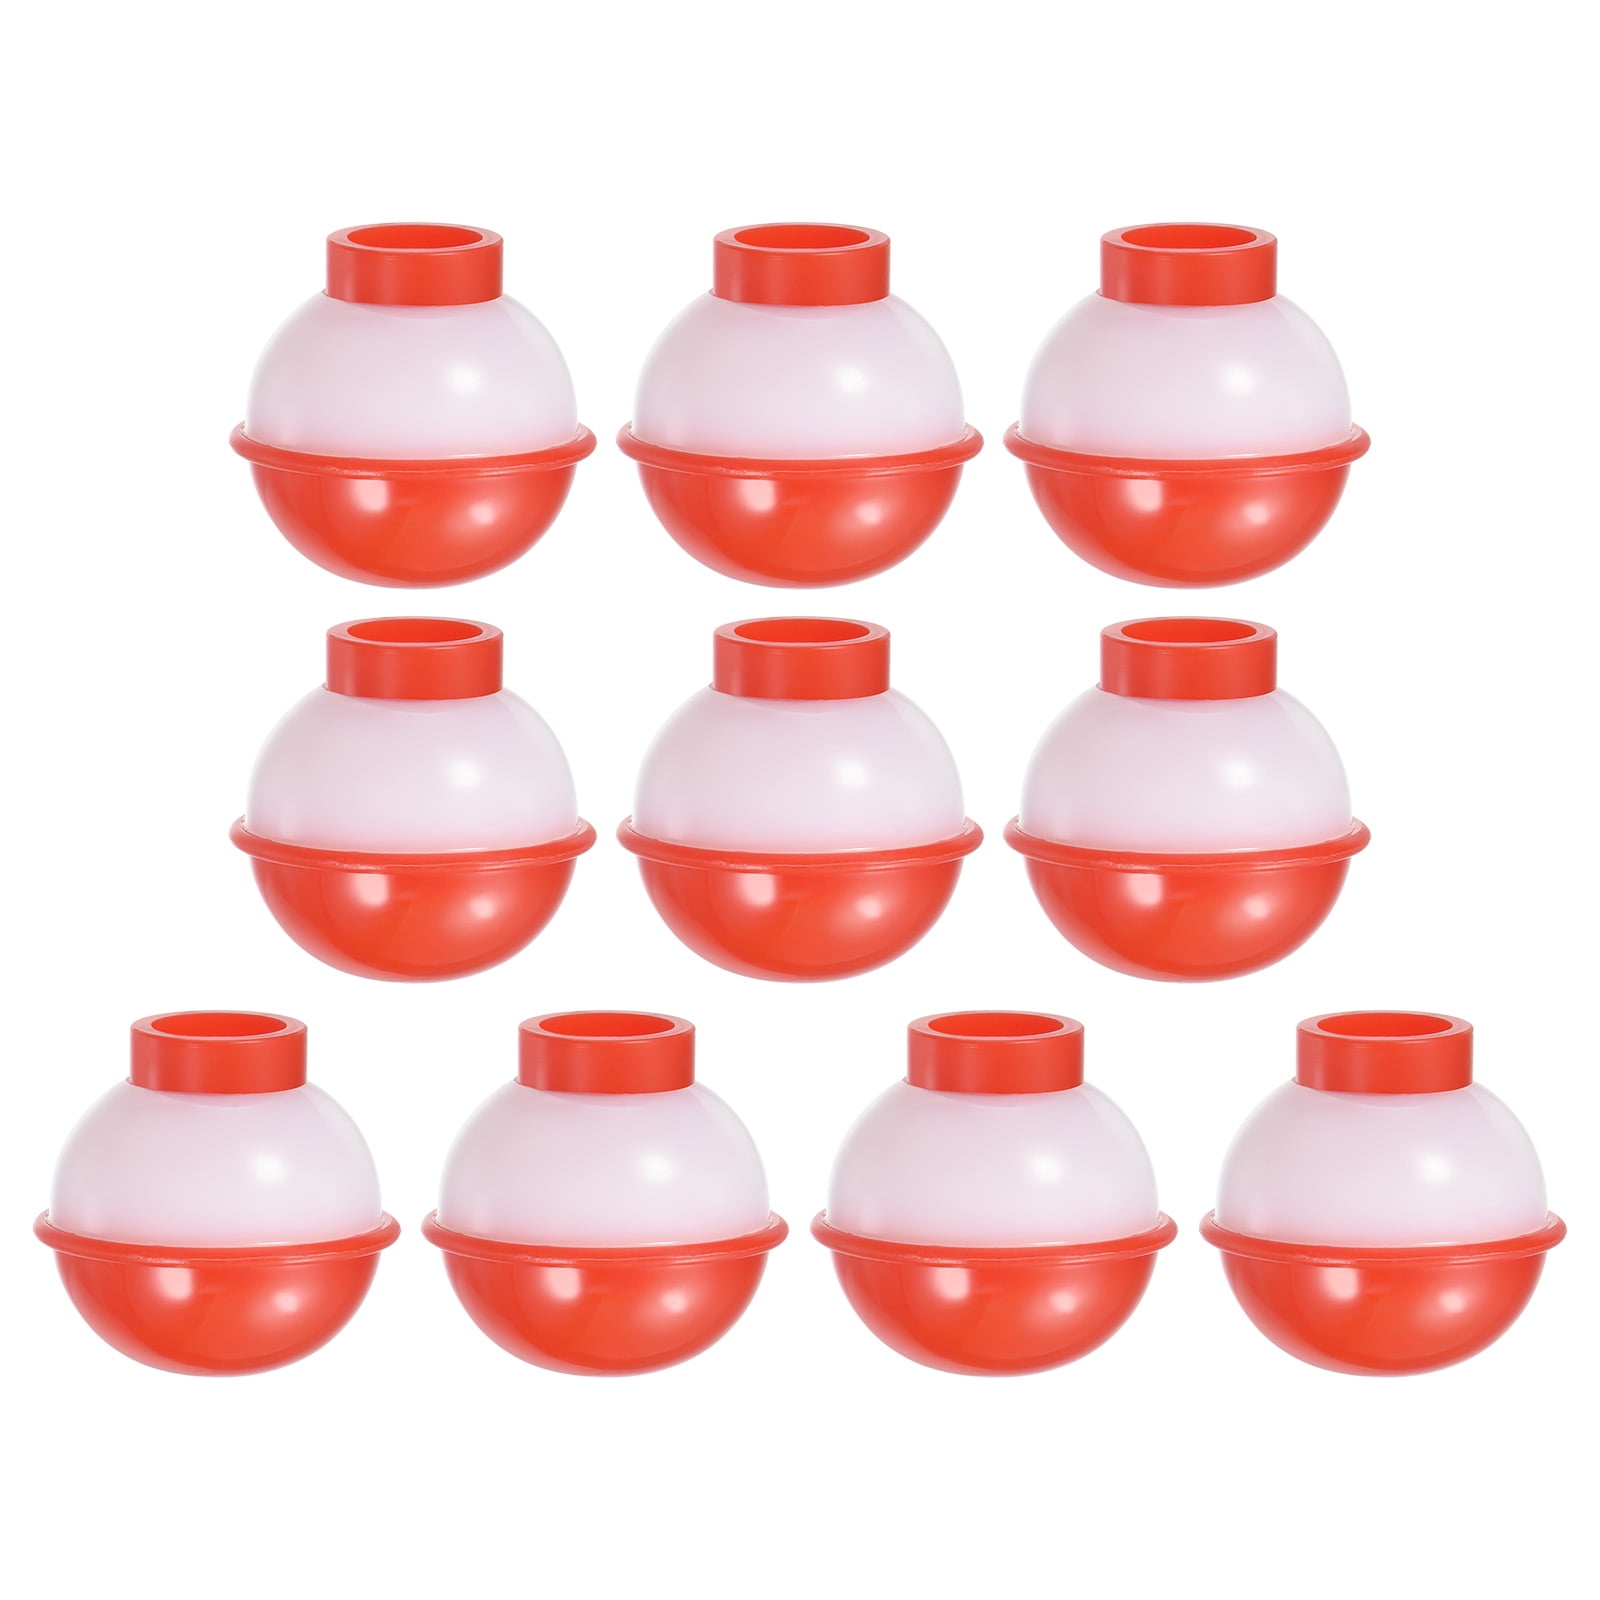 BESPORTBLE 40 PCS Big Float Big Belly Float Fishing Gear Accessories  Japanese Accessories red Accessories Fishing Float Fishing Marker Buoys  Fishing